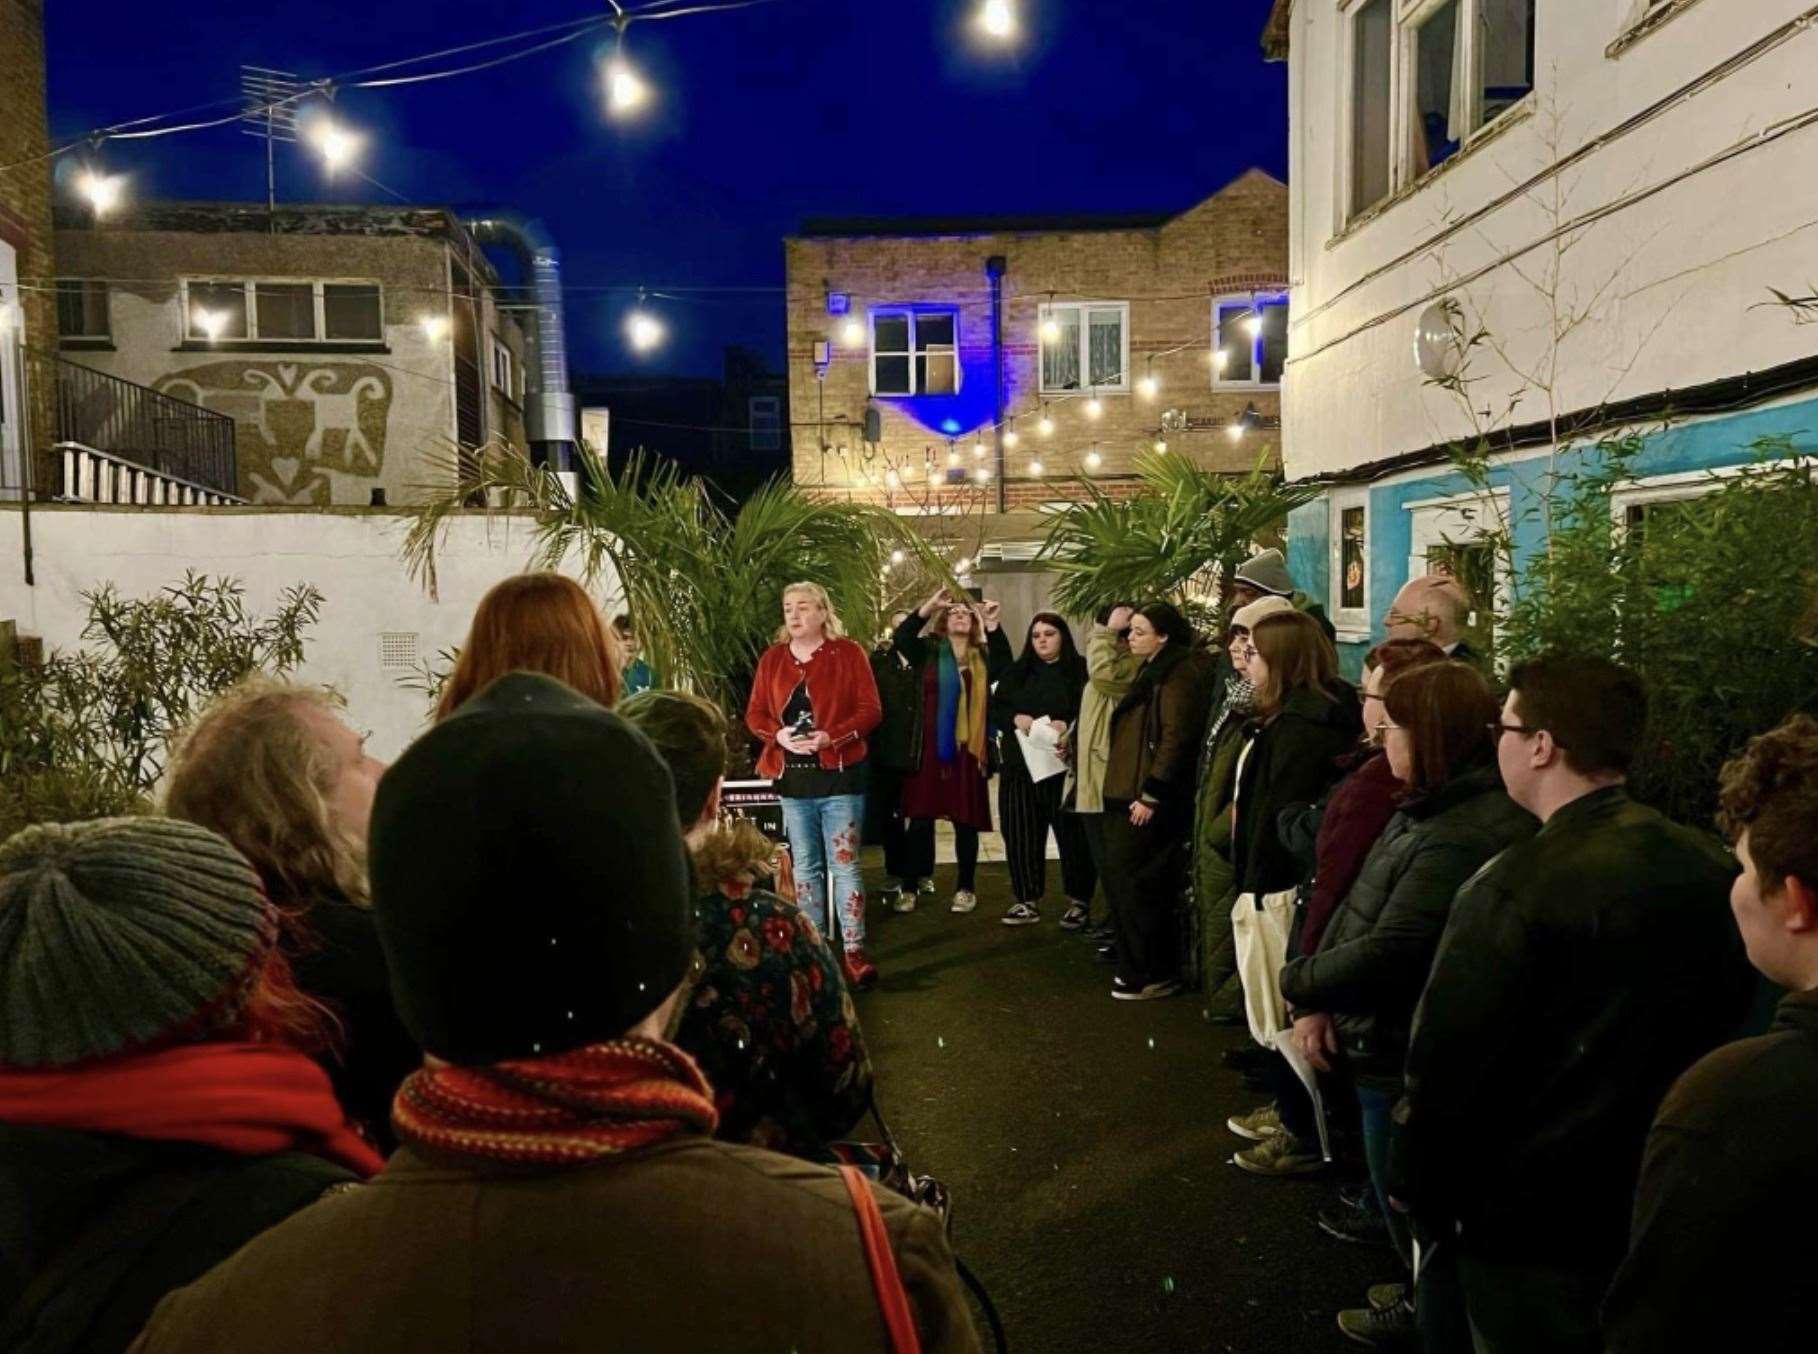 A vigil was held in Chatham to mourn 16-year-old Brianna Ghey, a transgender girl who was stabbed to death in Cheshire. Picture: Shea Coffey (62506457)